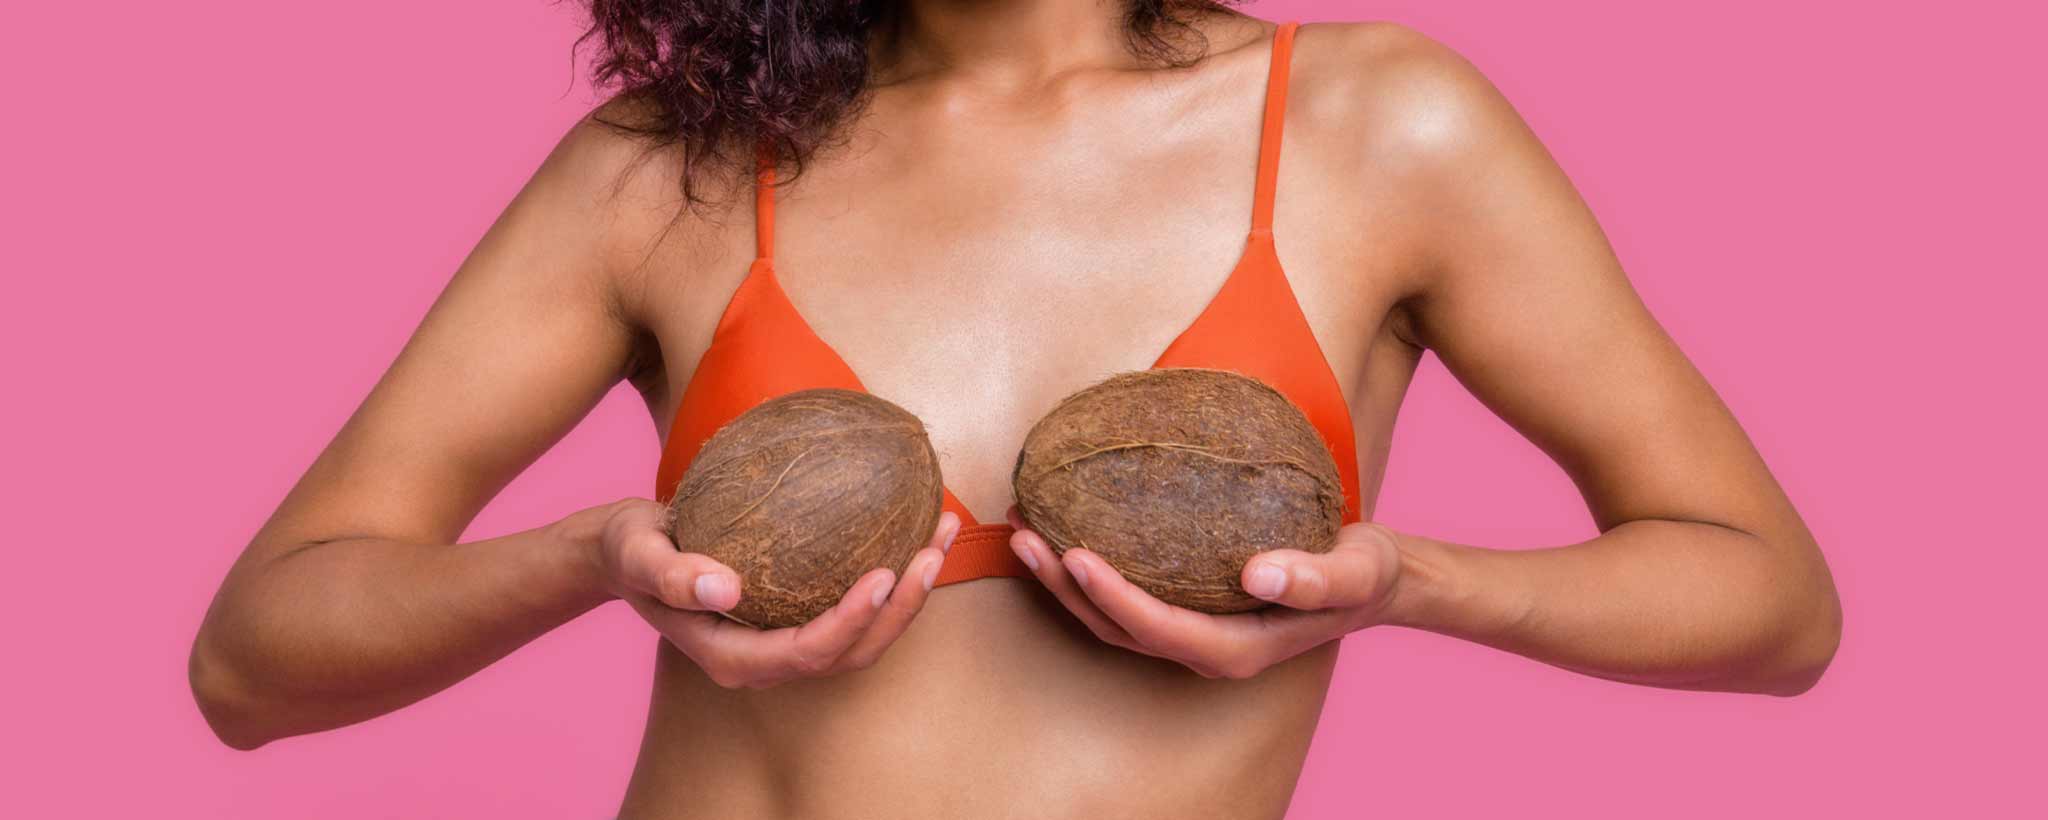 'Female holding coconuts in front of breasts'